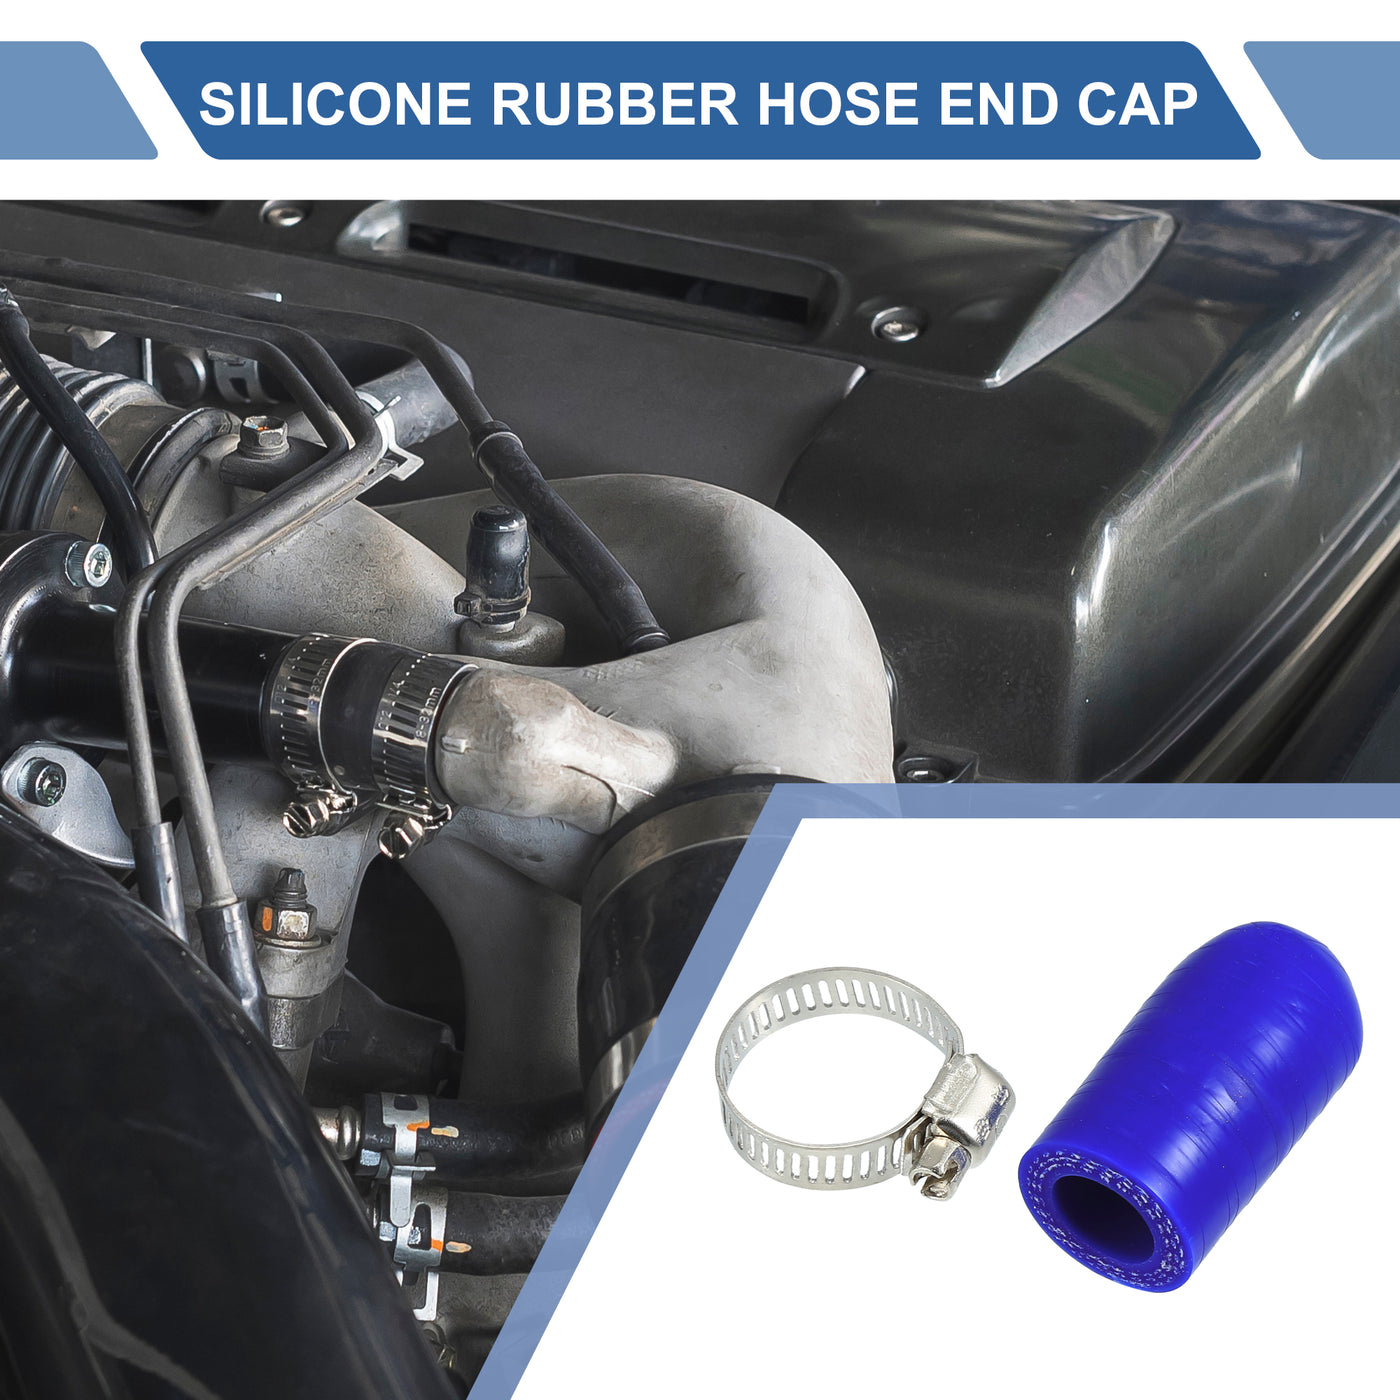 X AUTOHAUX 1 Set 30mm Length 14mm/0.55" ID Blue Car Silicone Rubber Hose End Cap with Clamps Silicone Reinforced Blanking Cap for Bypass Tube Universal